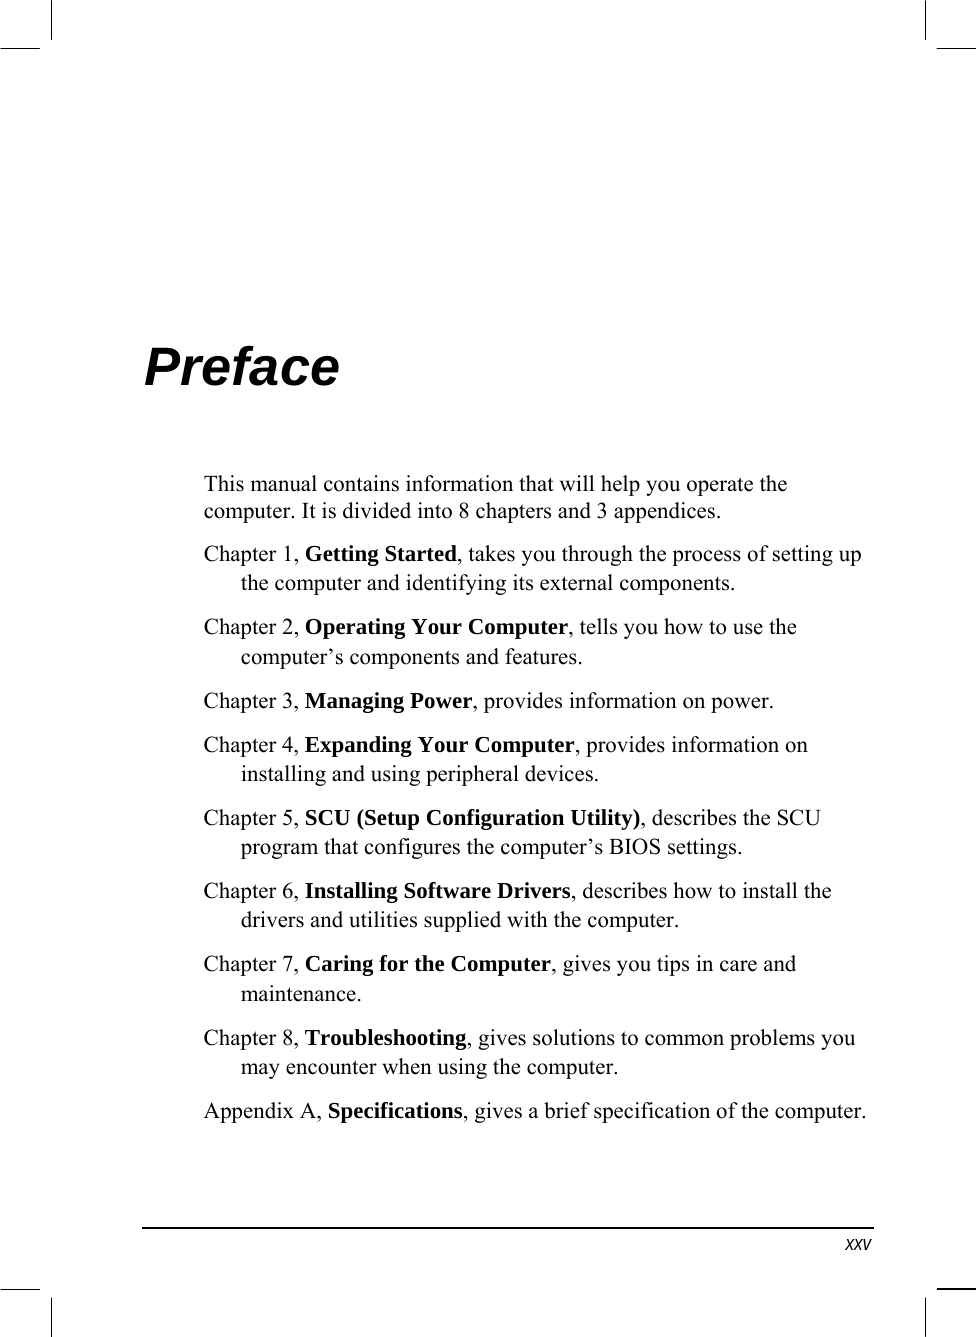   xxv Preface This manual contains information that will help you operate the computer. It is divided into 8 chapters and 3 appendices. Chapter 1, Getting Started, takes you through the process of setting up the computer and identifying its external components. Chapter 2, Operating Your Computer, tells you how to use the computer’s components and features. Chapter 3, Managing Power, provides information on power. Chapter 4, Expanding Your Computer, provides information on installing and using peripheral devices. Chapter 5, SCU (Setup Configuration Utility), describes the SCU program that configures the computer’s BIOS settings. Chapter 6, Installing Software Drivers, describes how to install the drivers and utilities supplied with the computer. Chapter 7, Caring for the Computer, gives you tips in care and maintenance. Chapter 8, Troubleshooting, gives solutions to common problems you may encounter when using the computer. Appendix A, Specifications, gives a brief specification of the computer. 